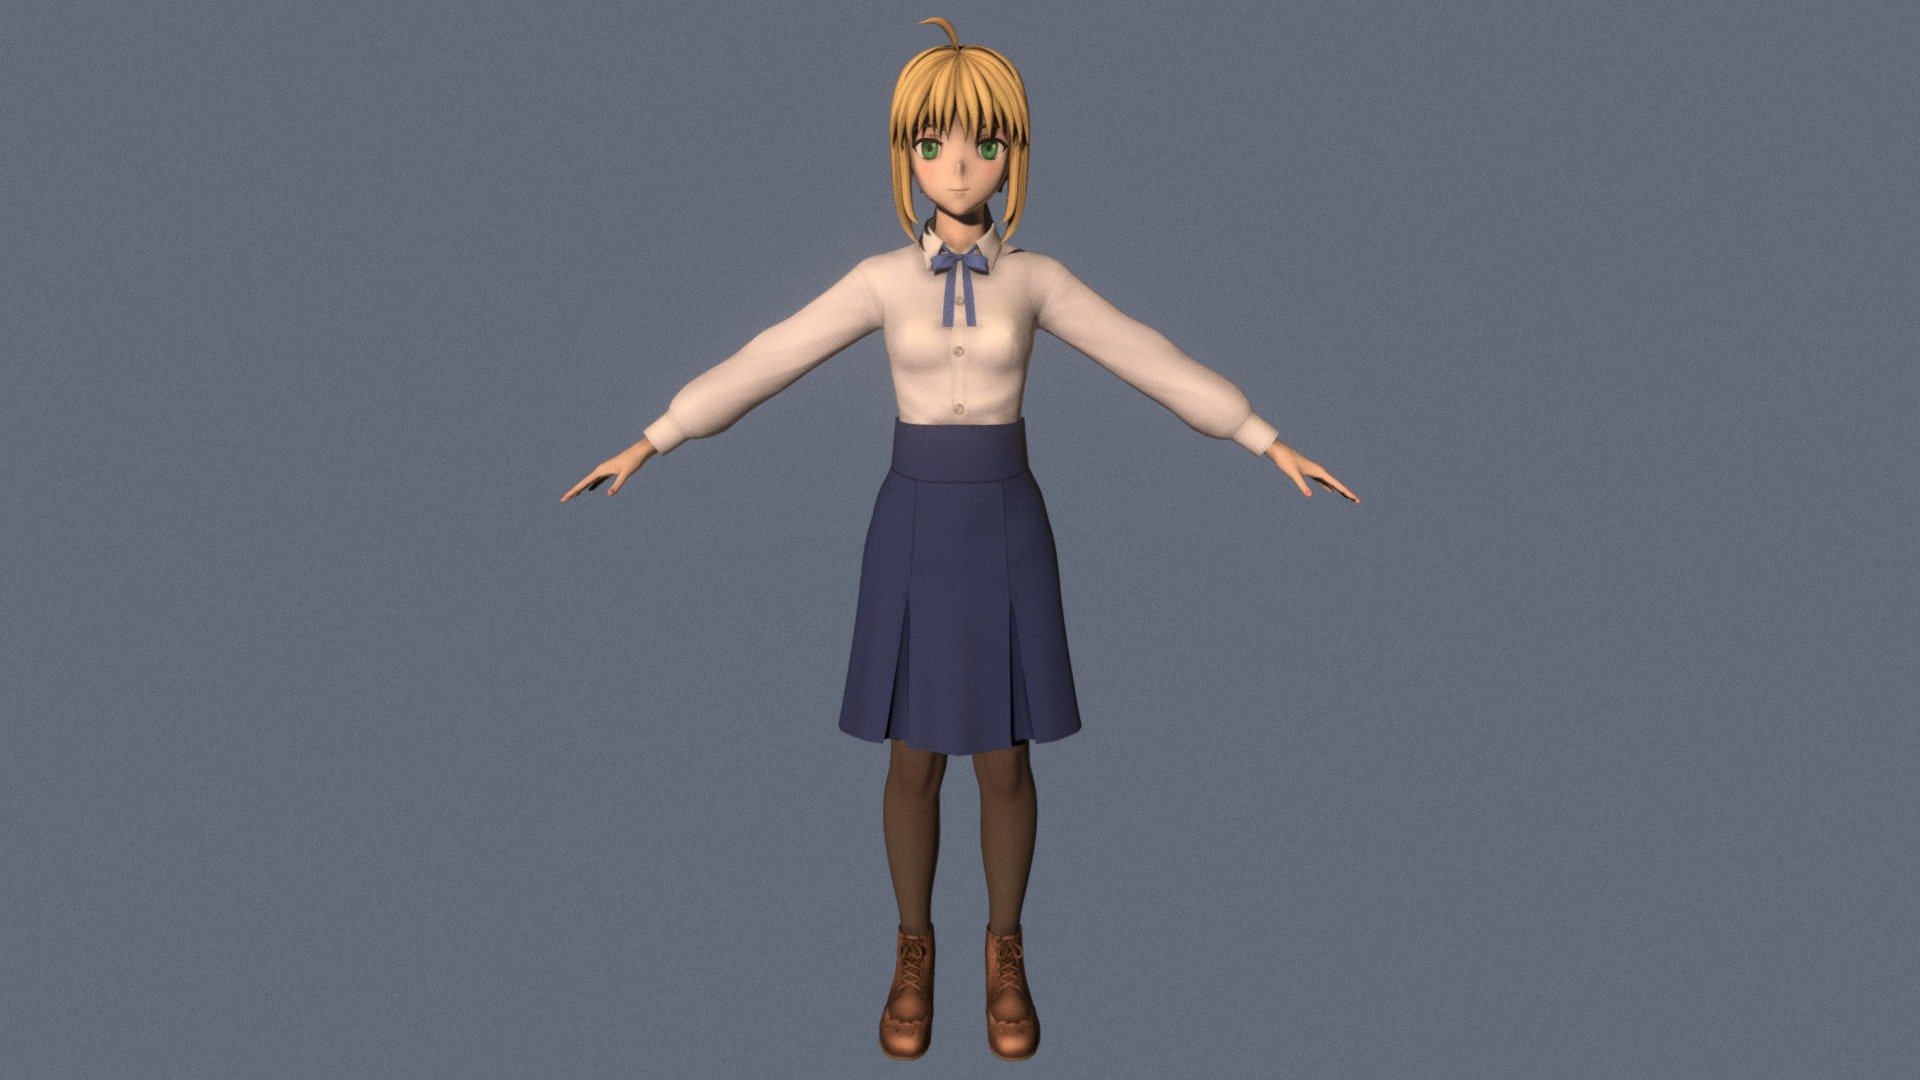 T-pose rigged model of anime girl Saber (Fate Stay Night).

Body and clothings are rigged and skinned by 3ds Max CAT system.

Eye direction and facial animation controlled by Morpher modifier / Shape Keys / Blendshape.

This product include .FBX (ver. 7200) and .MAX (ver. 2010) files.

3ds Max version is turbosmoothed to give a high quality render (as you can see here).

Original main body mesh have ~7.000 polys.

This 3D model may need some tweaking to adapt the rig system to games engine and other platforms.

I support convert model to various file formats (the rig data will be lost in this process): 3DS; AI; ASE; DAE; DWF; DWG; DXF; FLT; HTR; IGS; M3G; MQO; OBJ; SAT; STL; W3D; WRL; X.

You can buy all of my models in one pack to save cost: https://sketchfab.com/3d-models/all-of-my-anime-girls-c5a56156994e4193b9e8fa21a3b8360b

And I can make commission models.

If you have any questions, please leave a comment or contact me via my email 3d.eden.project@gmail.com 3d model